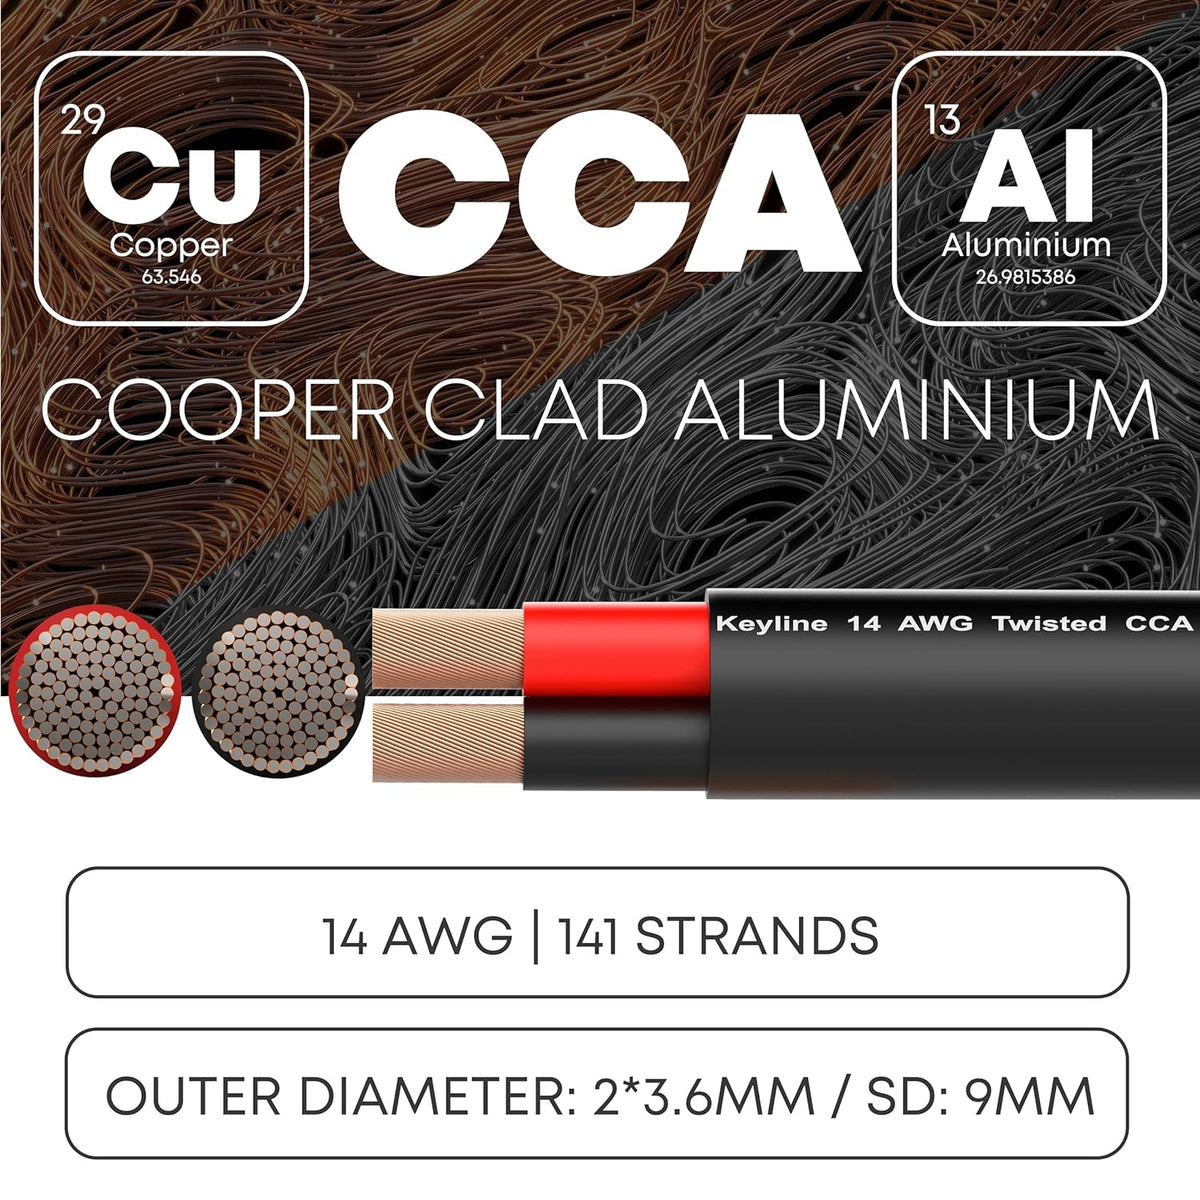 14 Gauge Speaker Wire - 100 Feet Black| 14-2 AWG Gauge - Outdoor Speaker Wire, CL3 CL2 Rated for in Ground Burial & in Wall / 2 Conductors - Marine Speaker Wire CCA Copper Clad Aluminum, Black 100ft